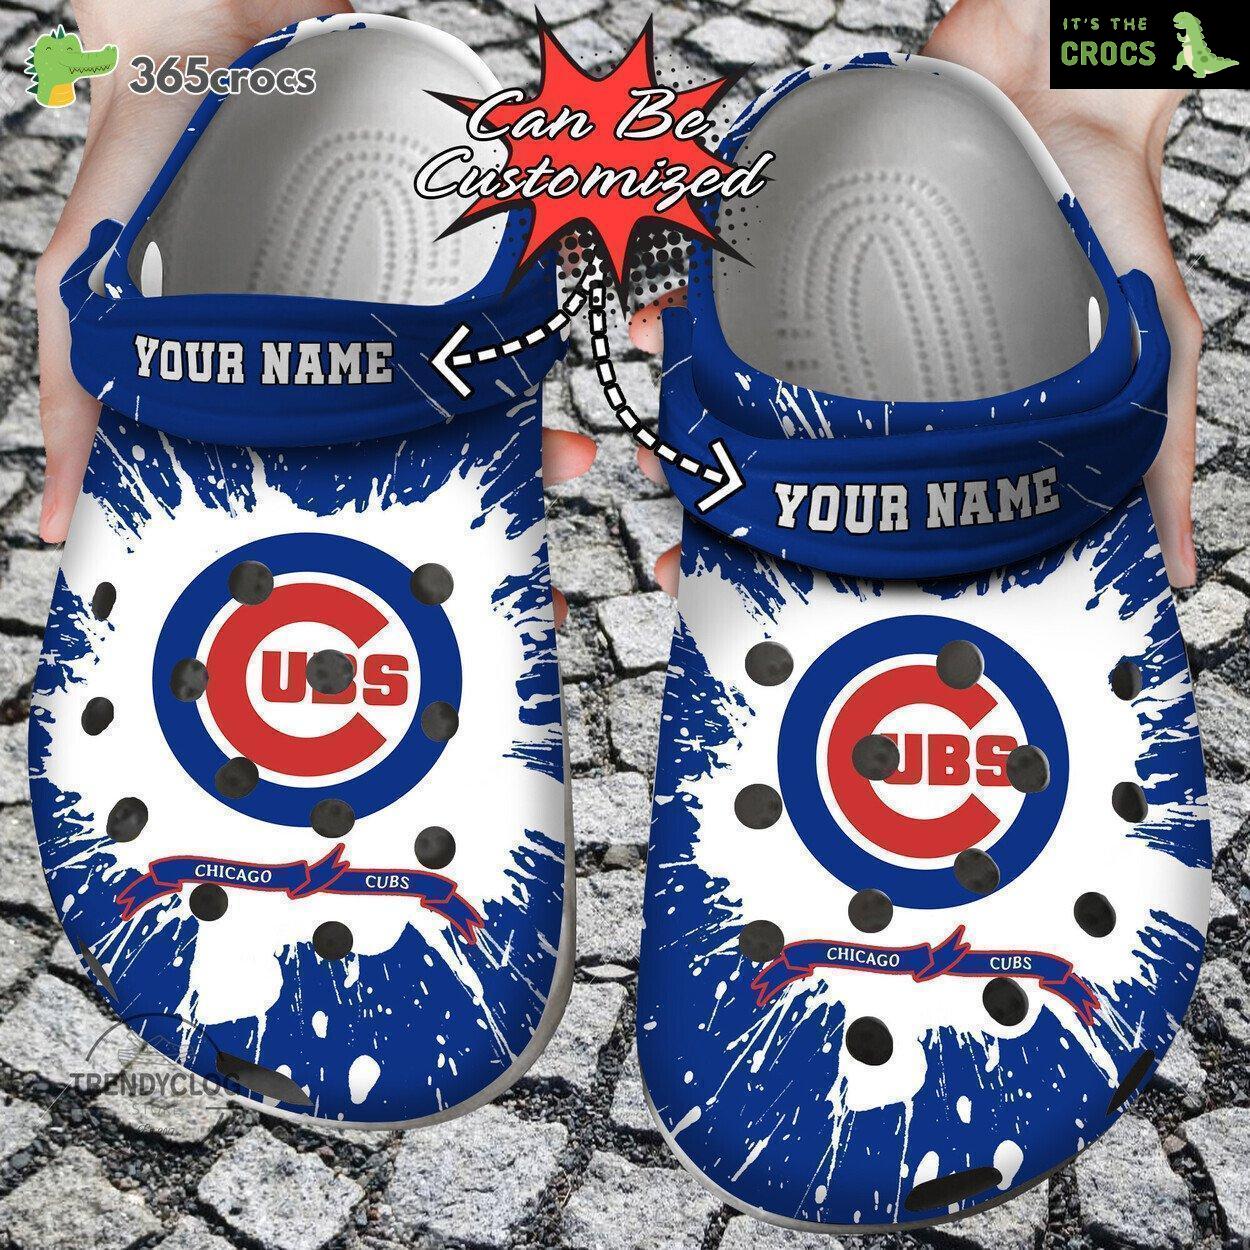 Chicago Cubs Baseball Team Personalized Design on Clog Footwear